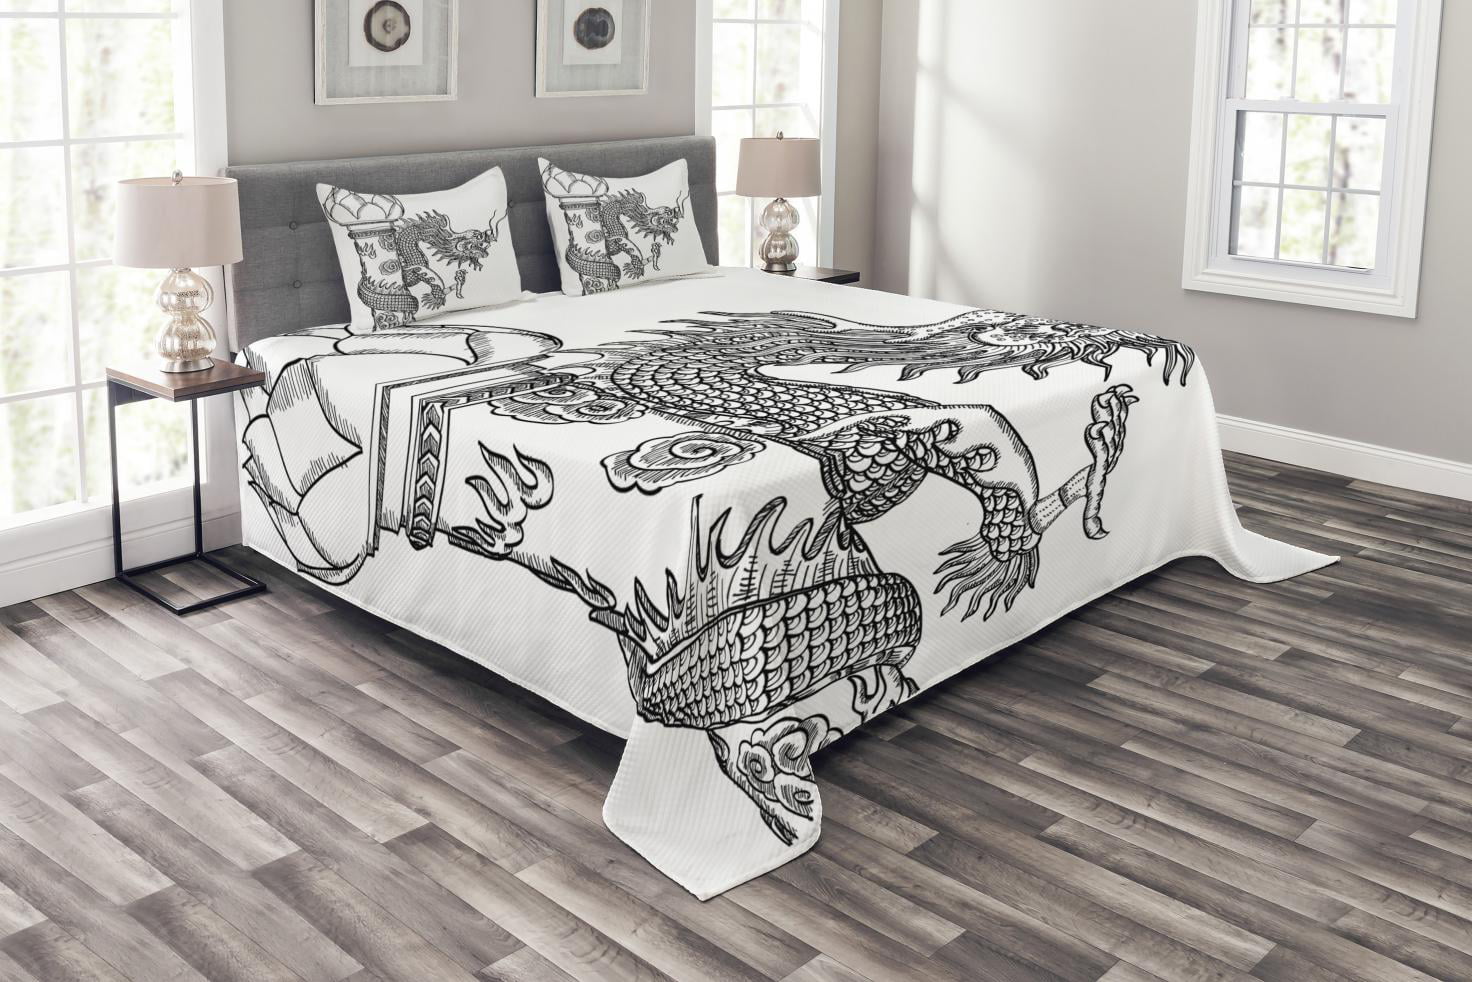 Quilted Teen Oriental Wall Hanging Medieval Embroidered Adult Gift Dragon Throw Bed Cover